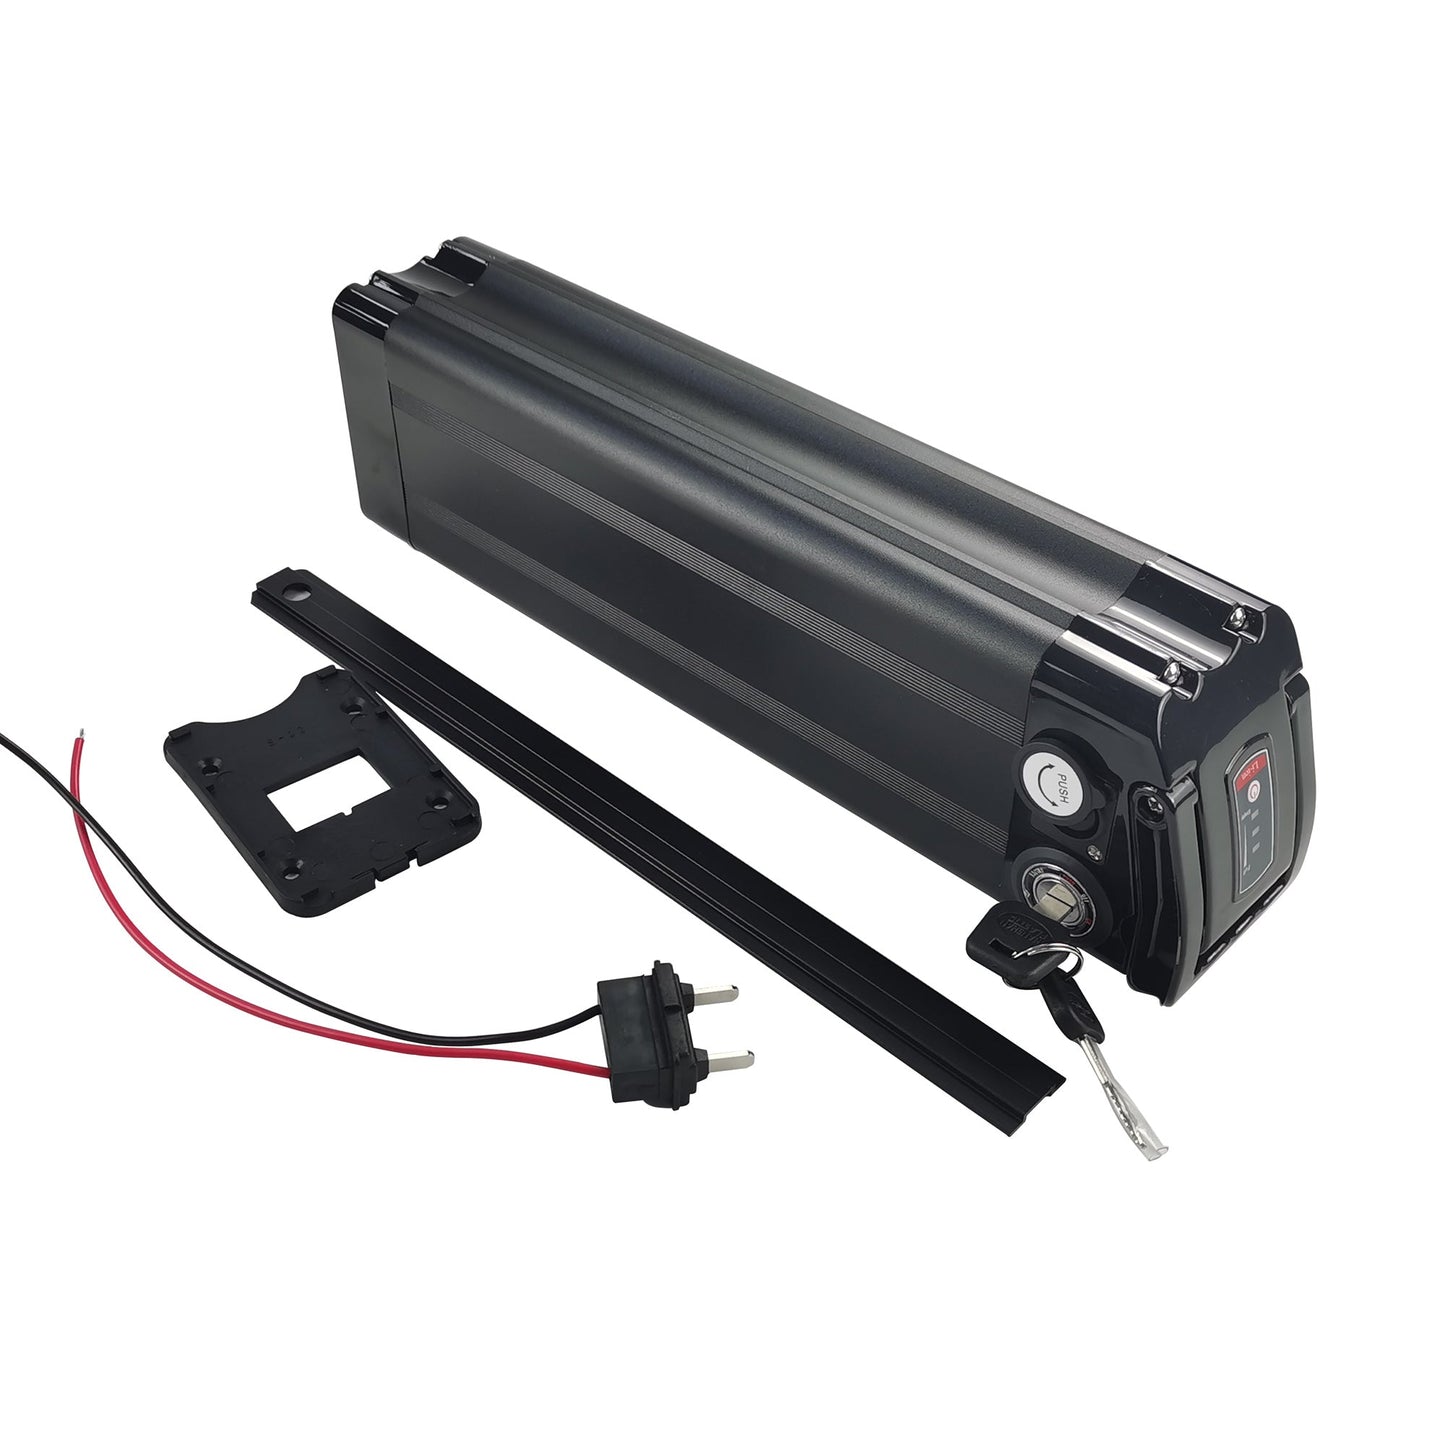 Spain Stock 36V17.5AH Silver Fish ebike battery Panasonic cell 25A BMS support 900W motor included 3A charger